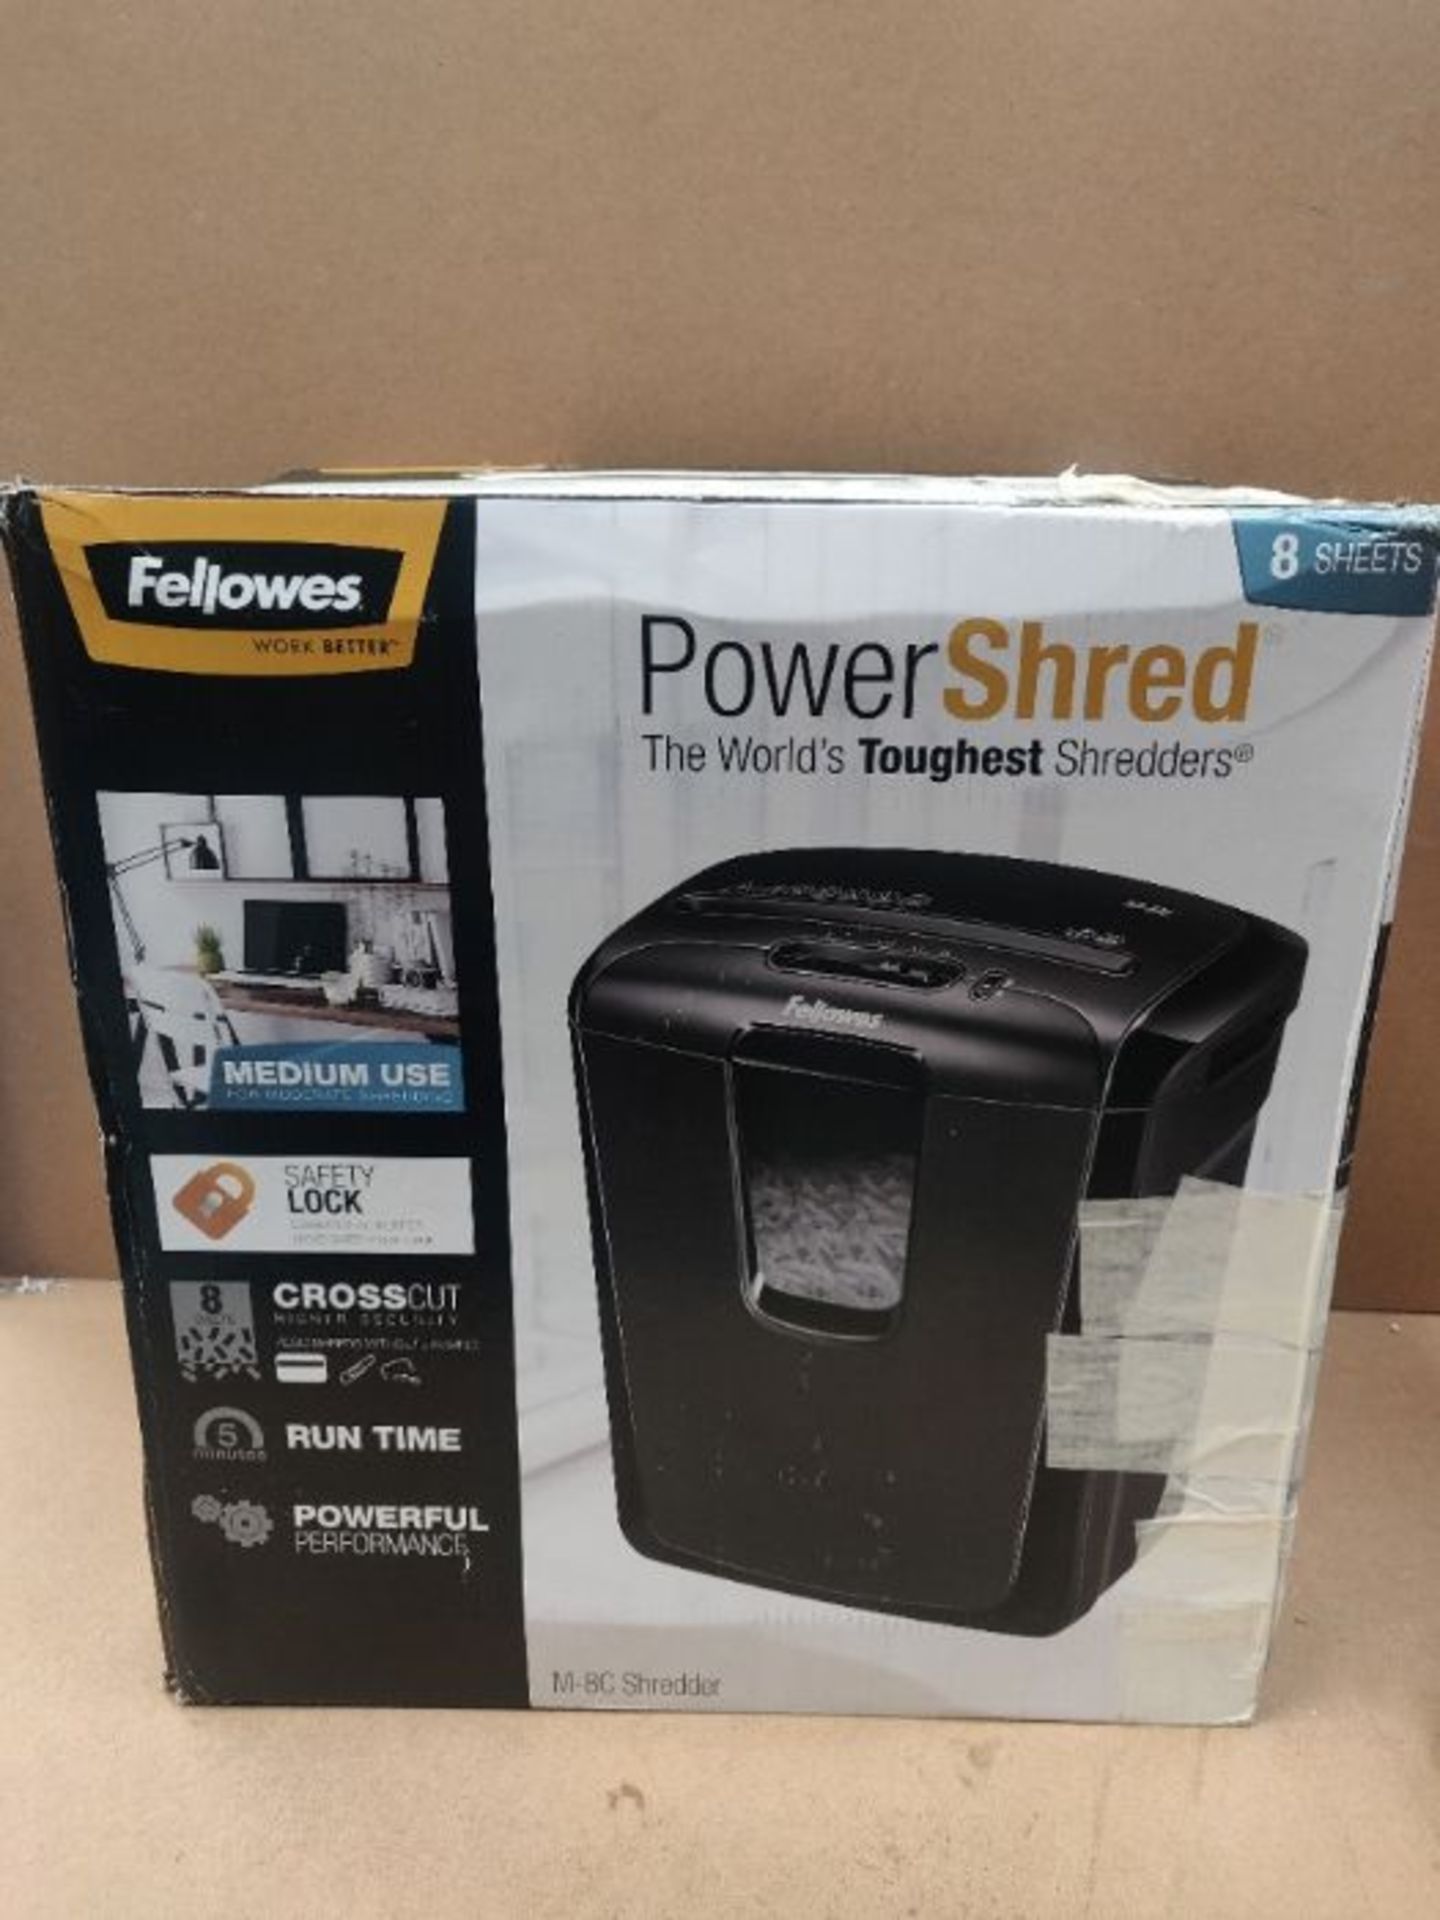 Fellowes Powershred M-8C 8 Sheet Cross Cut Personal Shredder with Safety Lock - Image 2 of 3